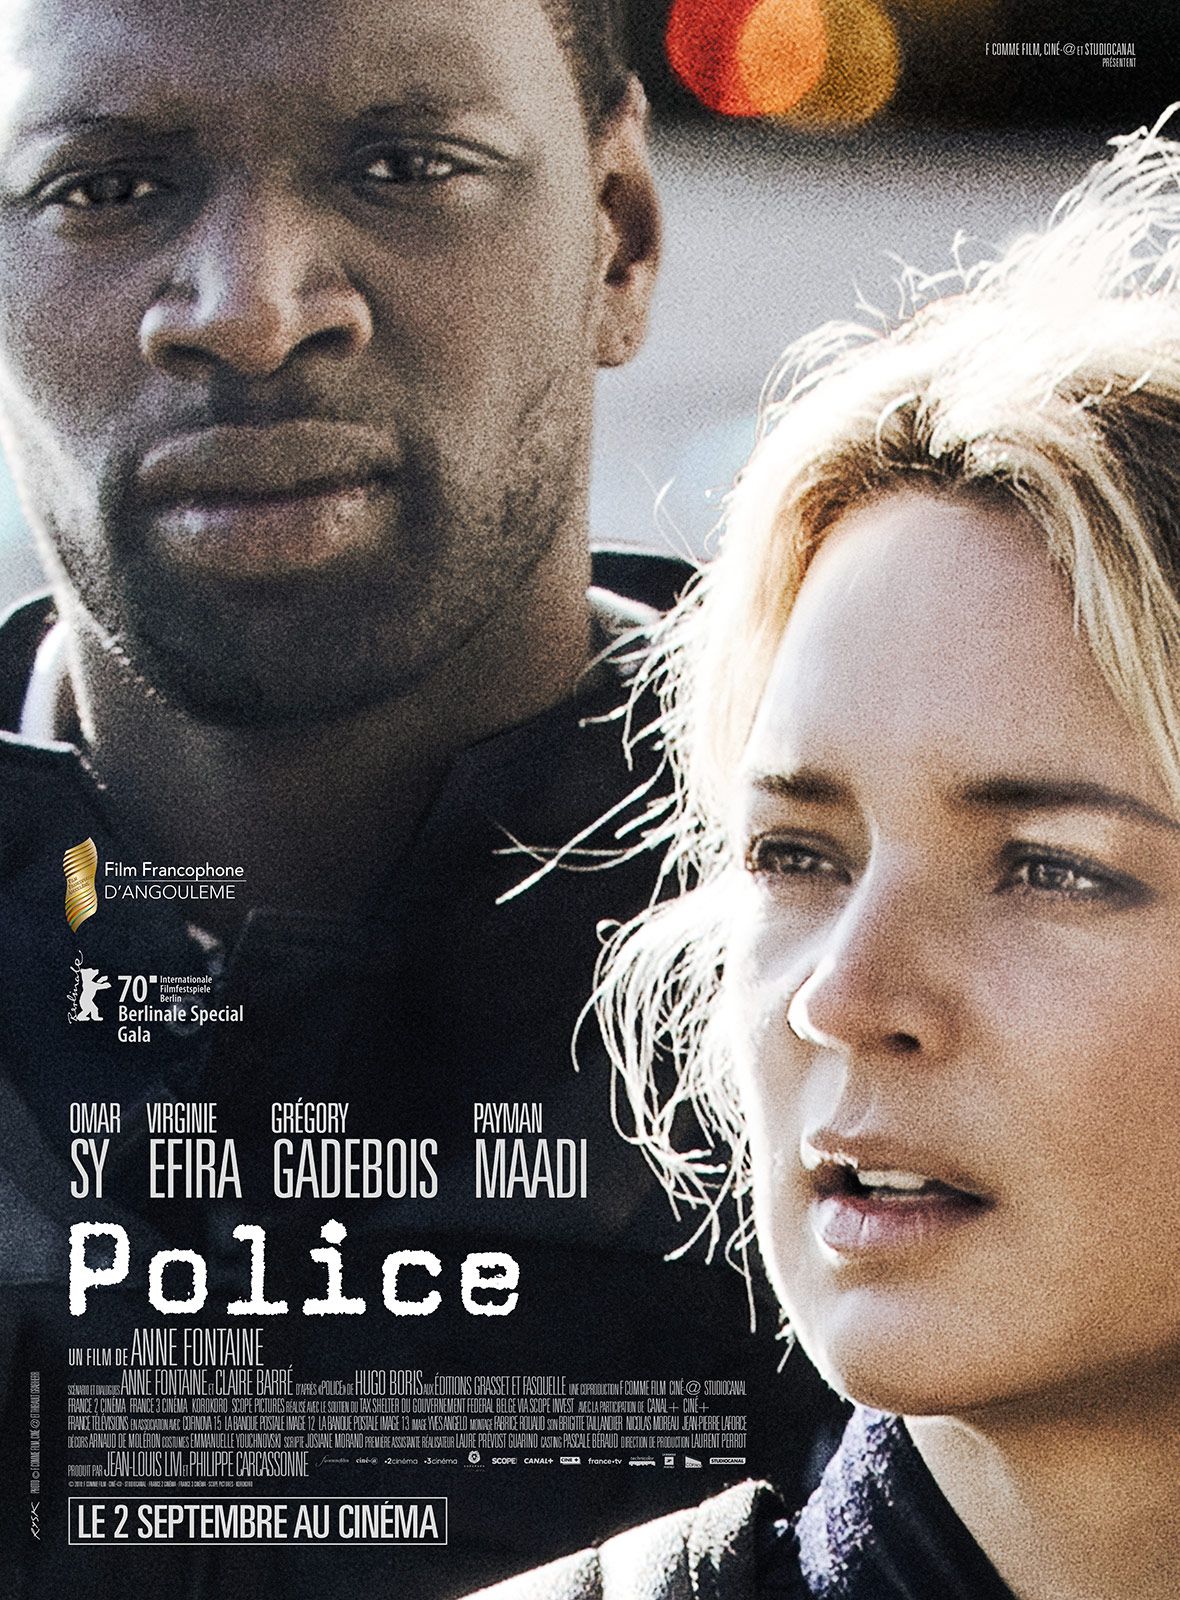 Police - Film (2020) streaming VF gratuit complet